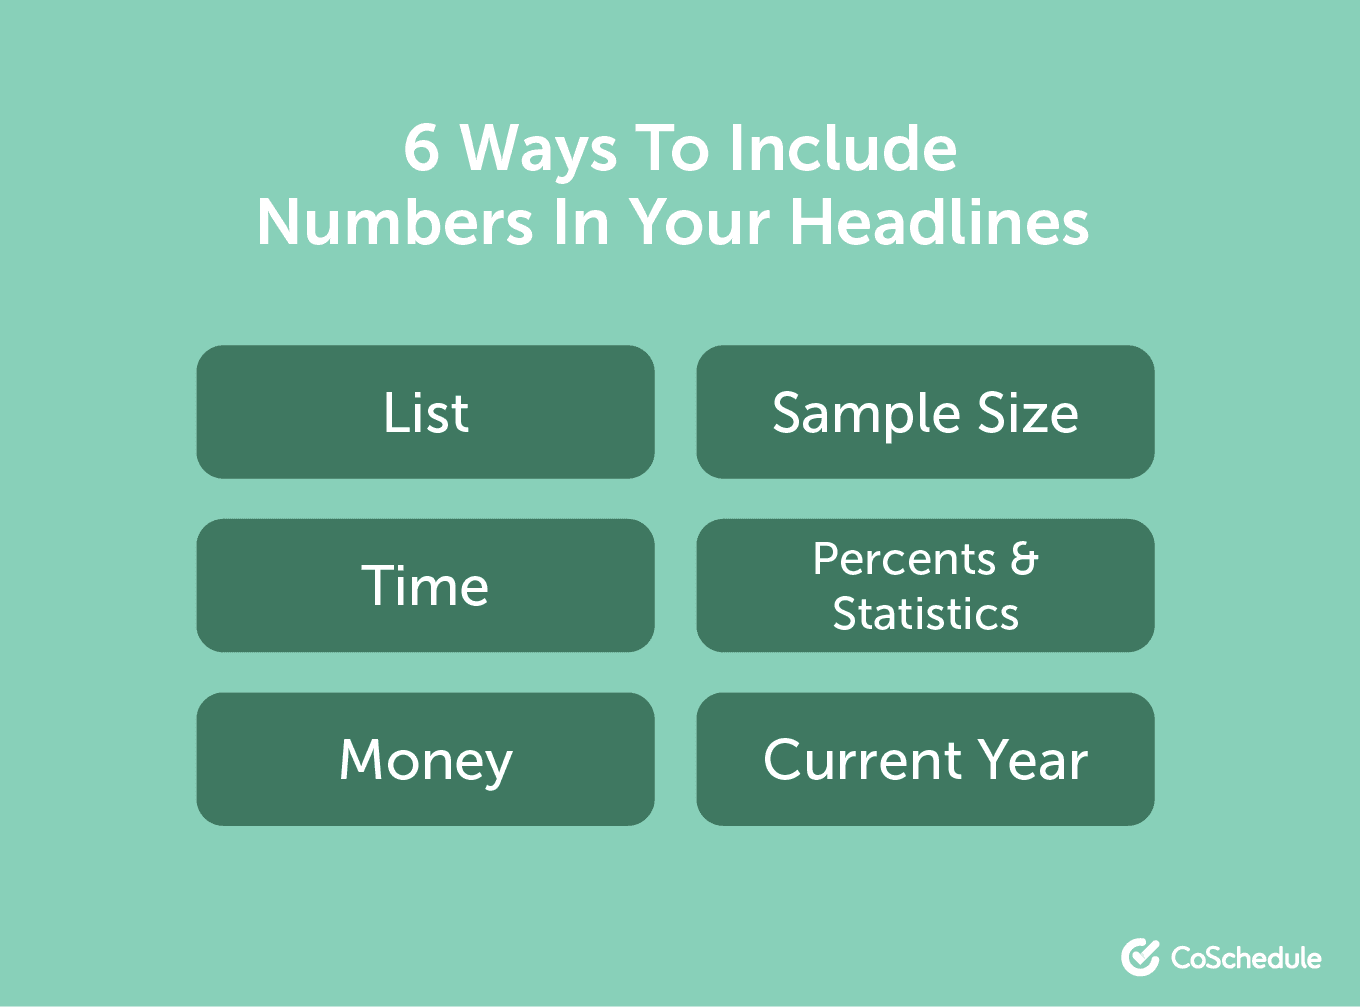 6 ways to include numbers in your headlines